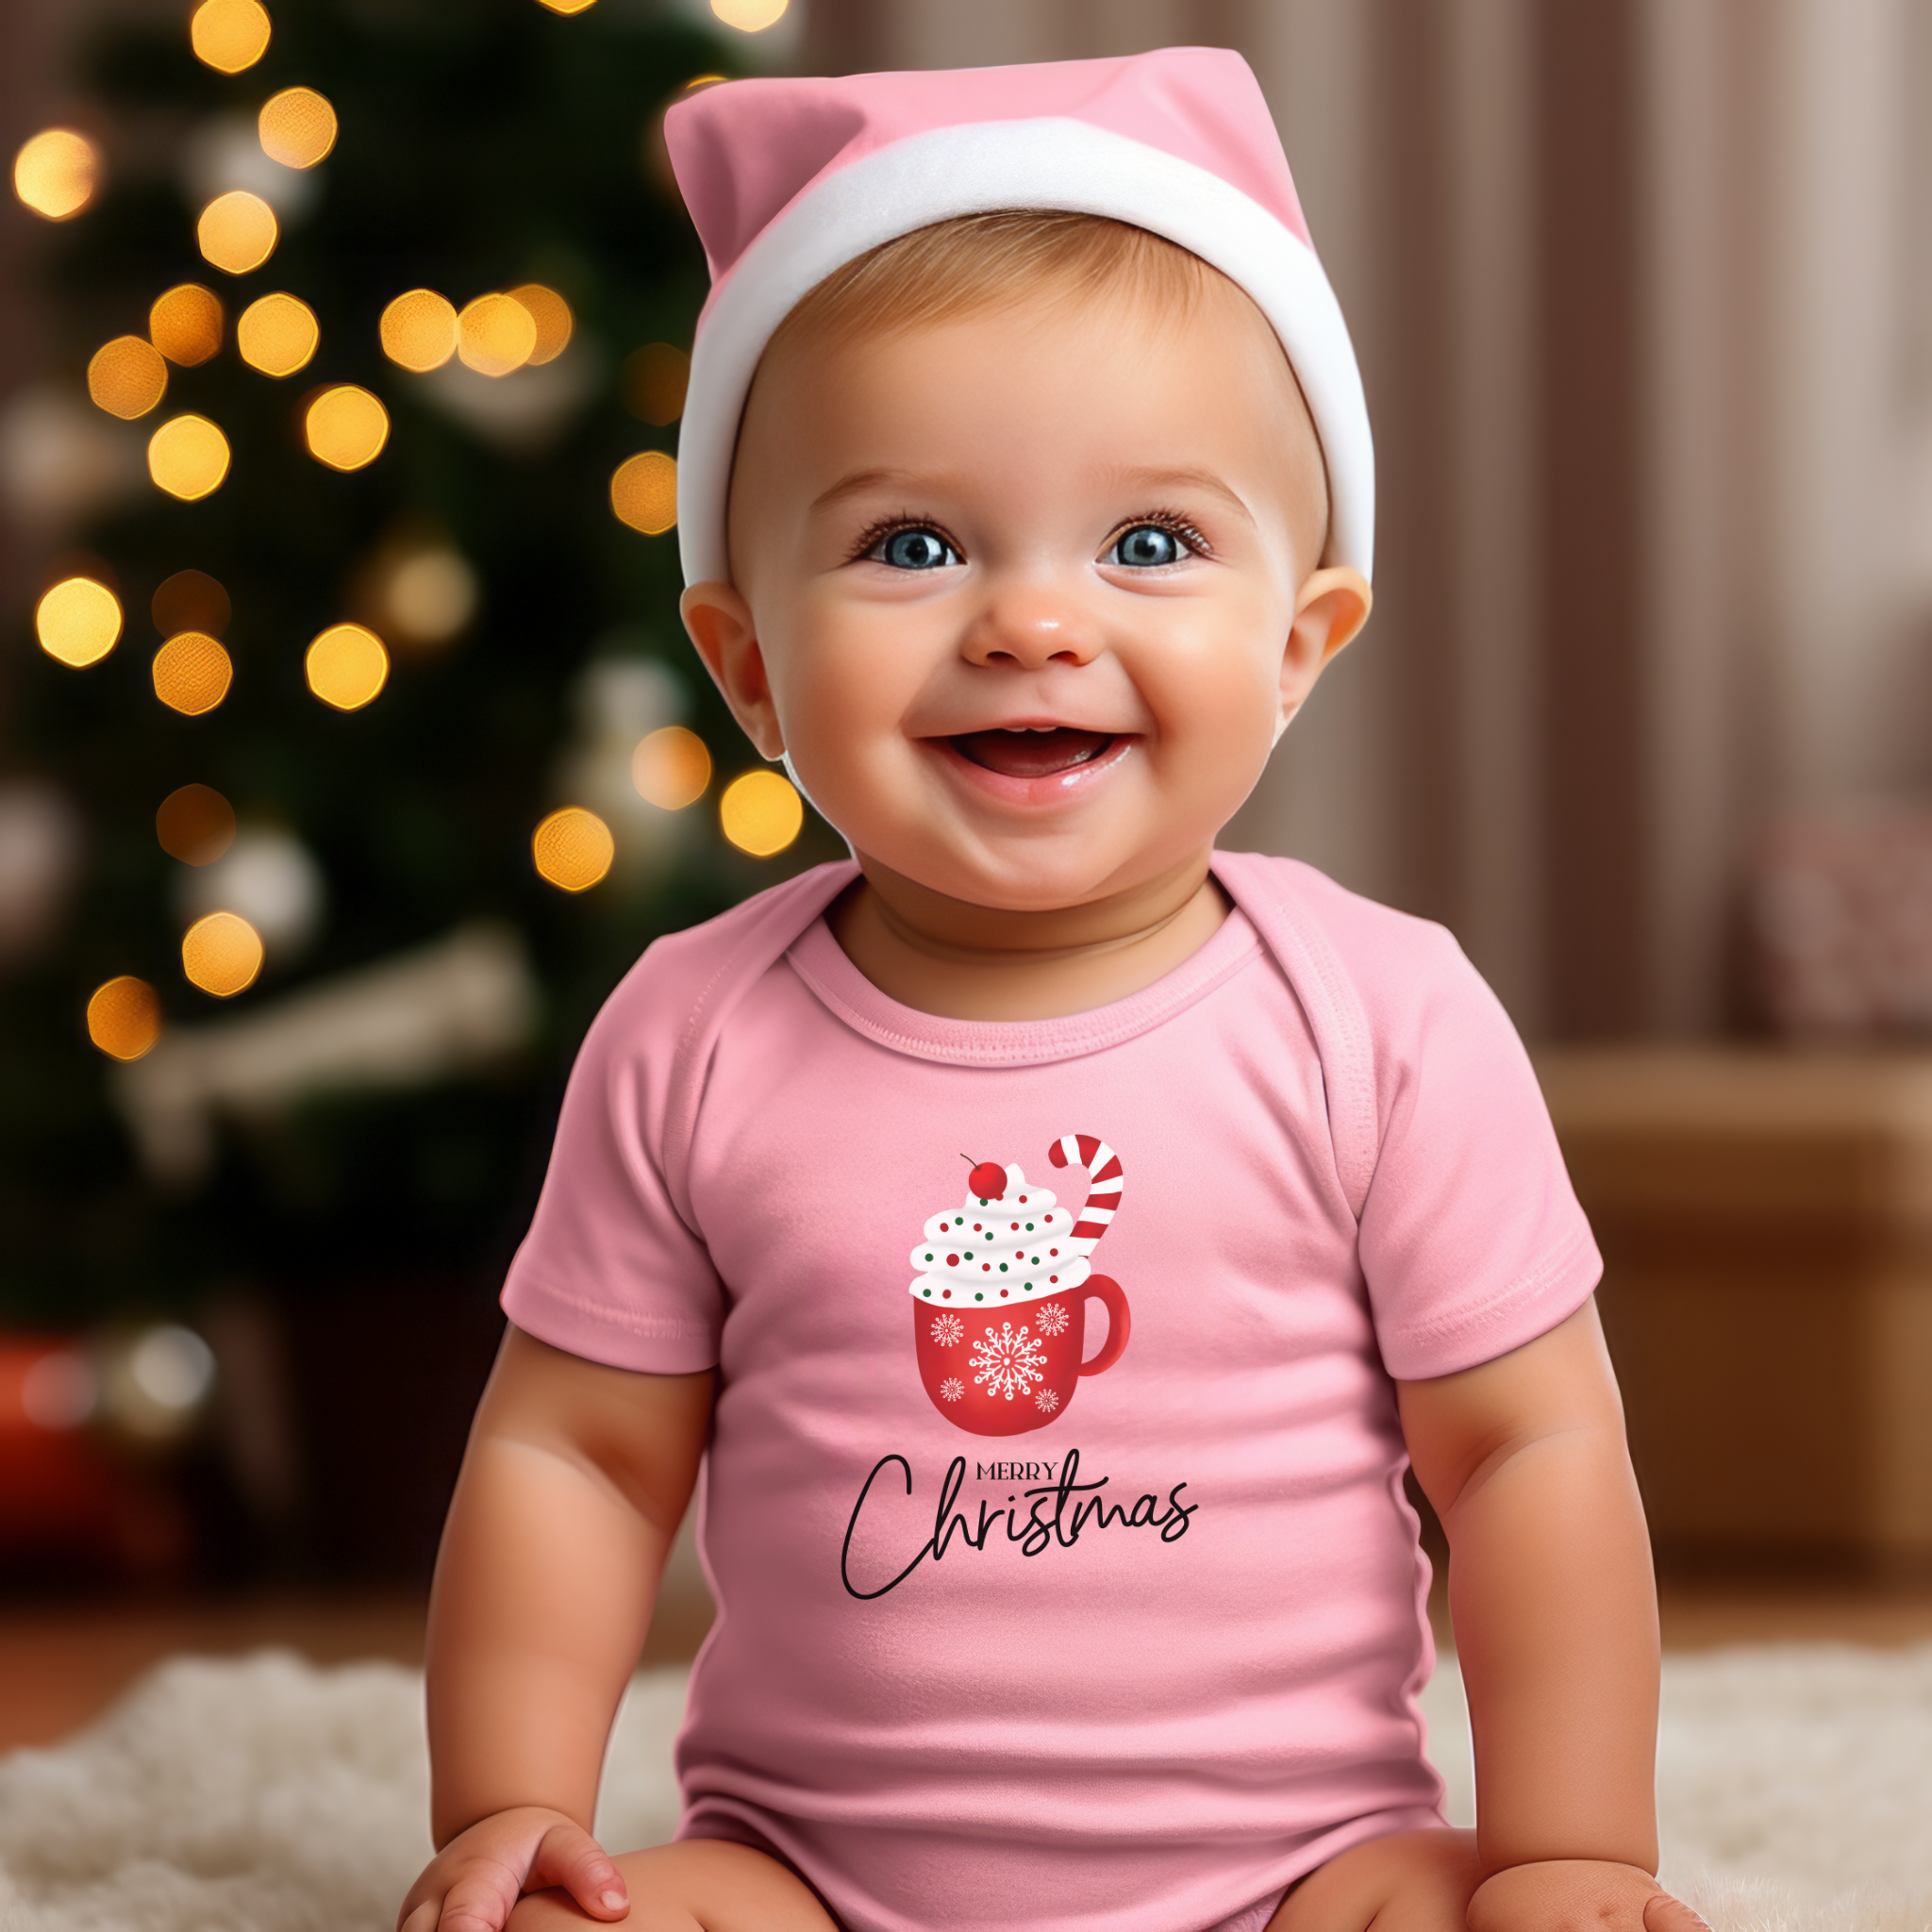 Merry Christmas Baby Onesie, Baby Clothes, end of the year